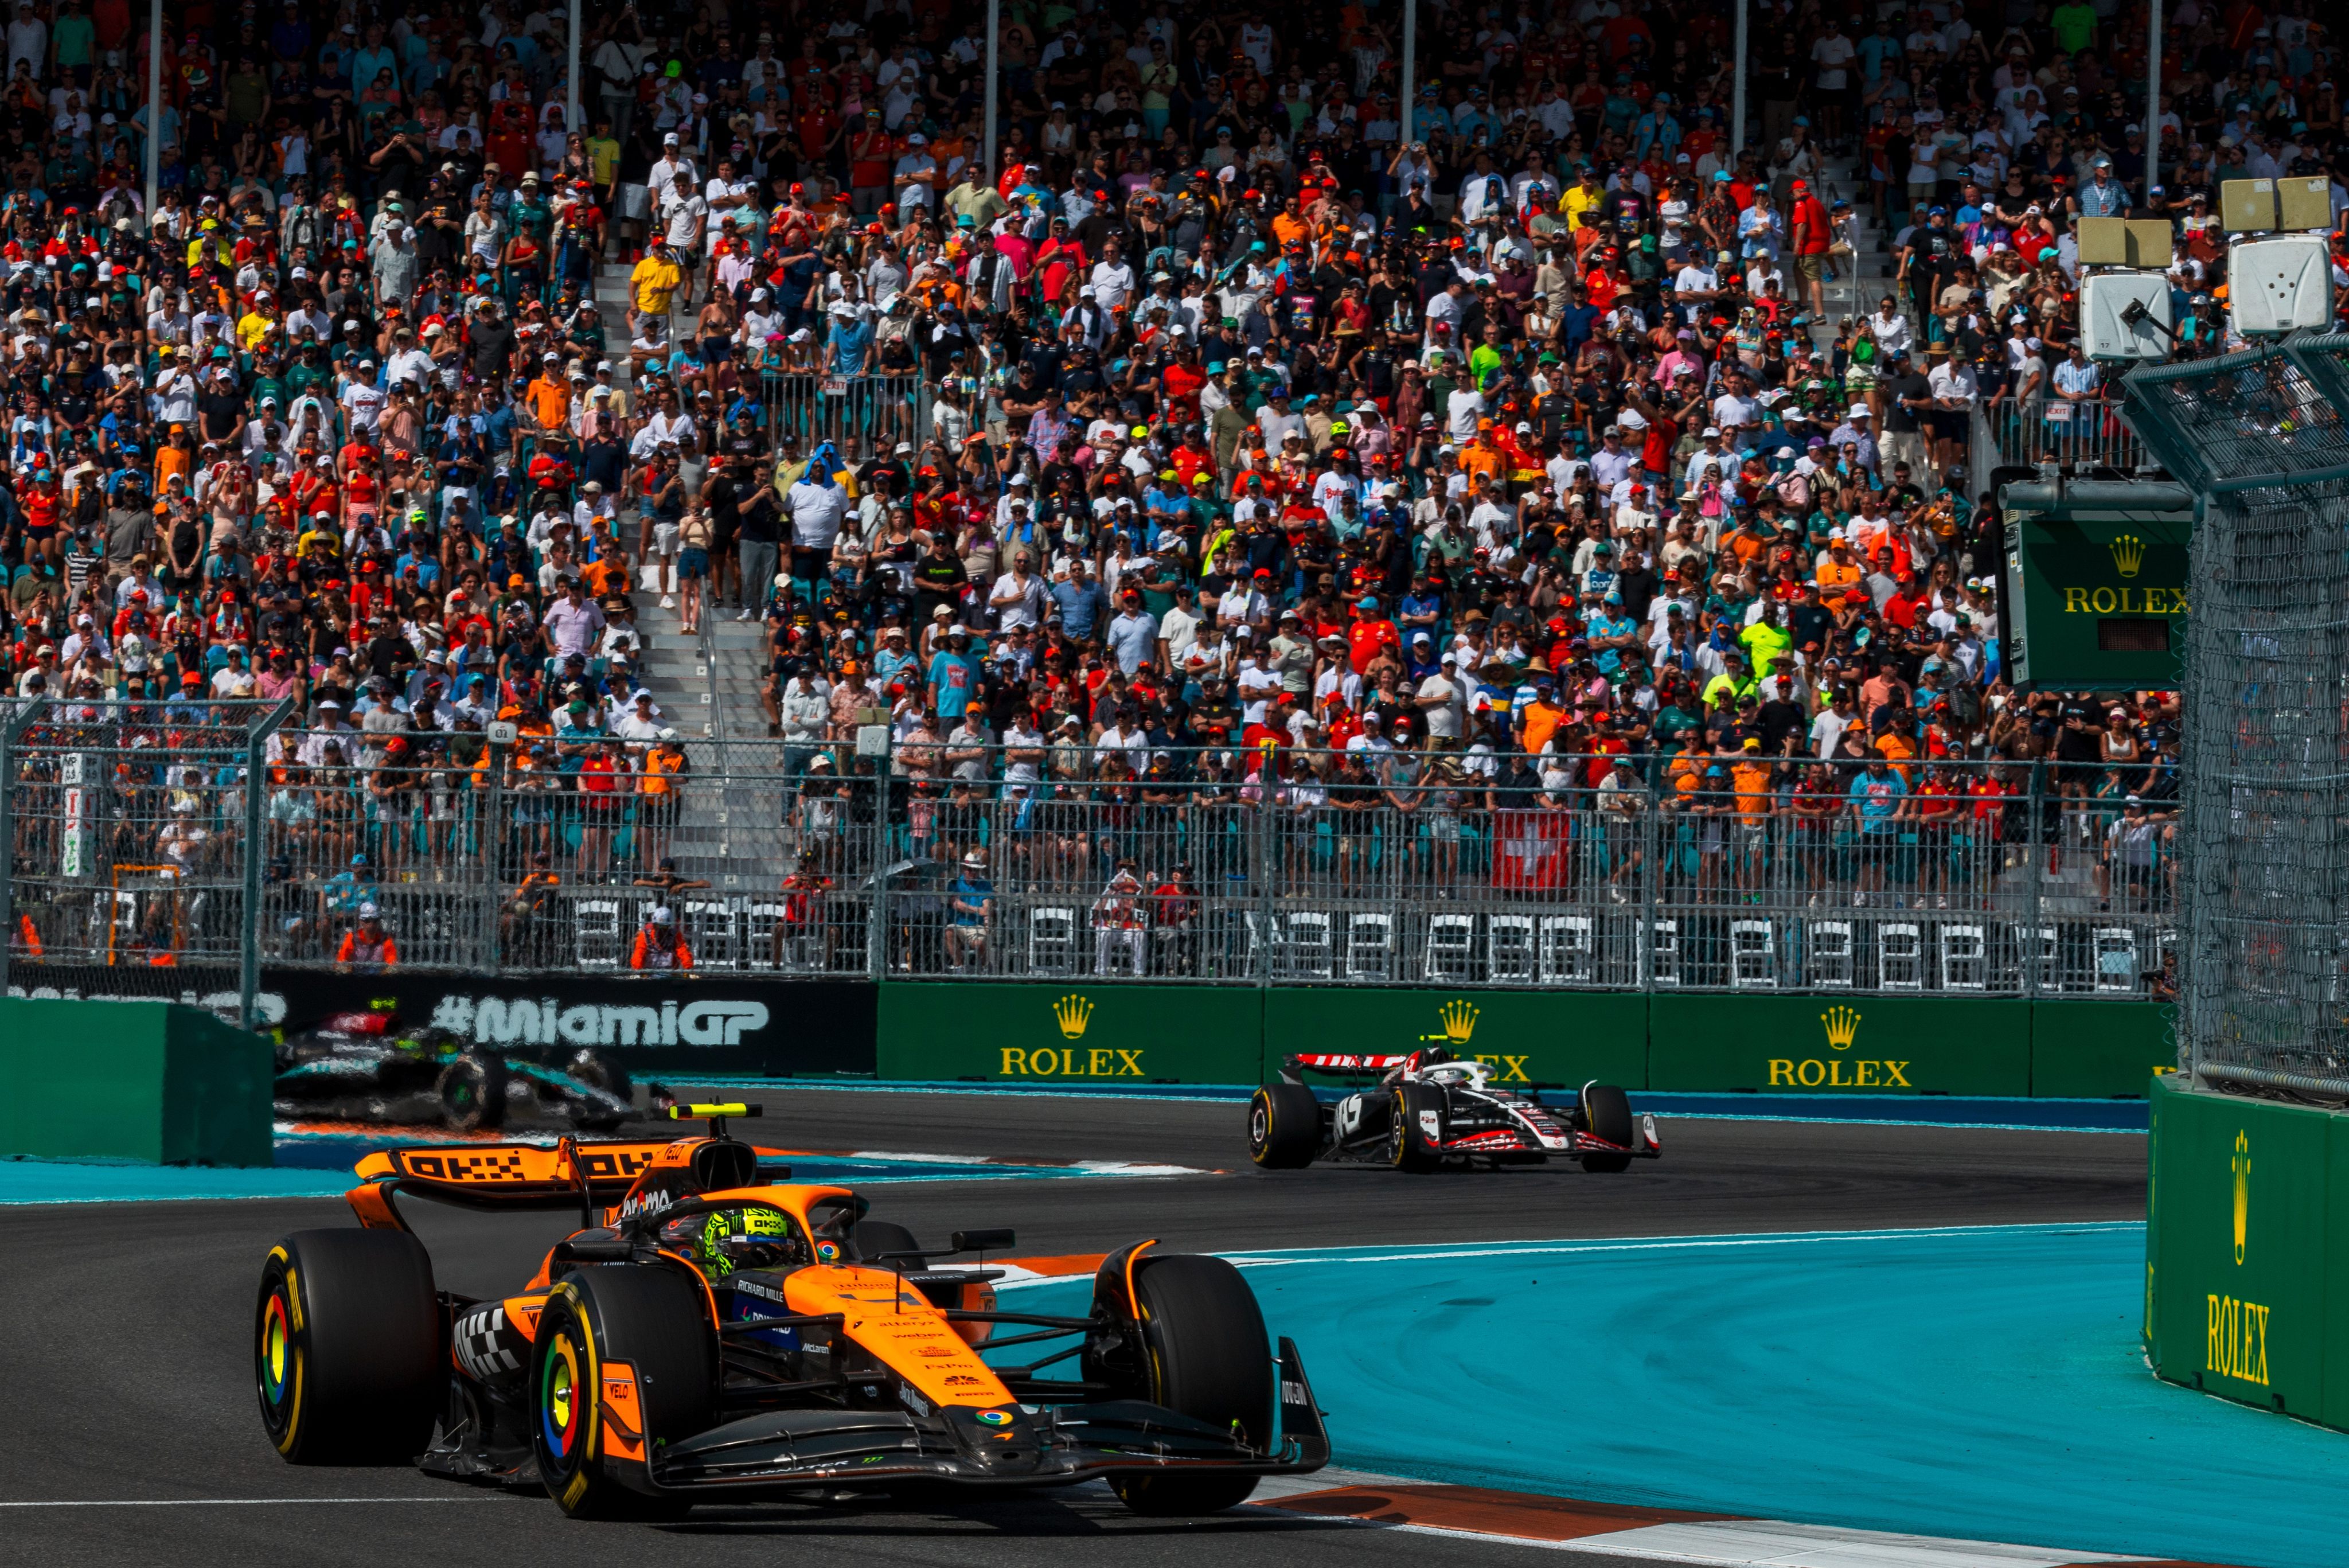 Rolex is Global Partner and Official Timepiece to the FIA Formula One World Championship, whose last race saw Lando Norris in his McLaren claim his first race win, at the 2024 Miami Grand Prix on May 5. Photos: Handout